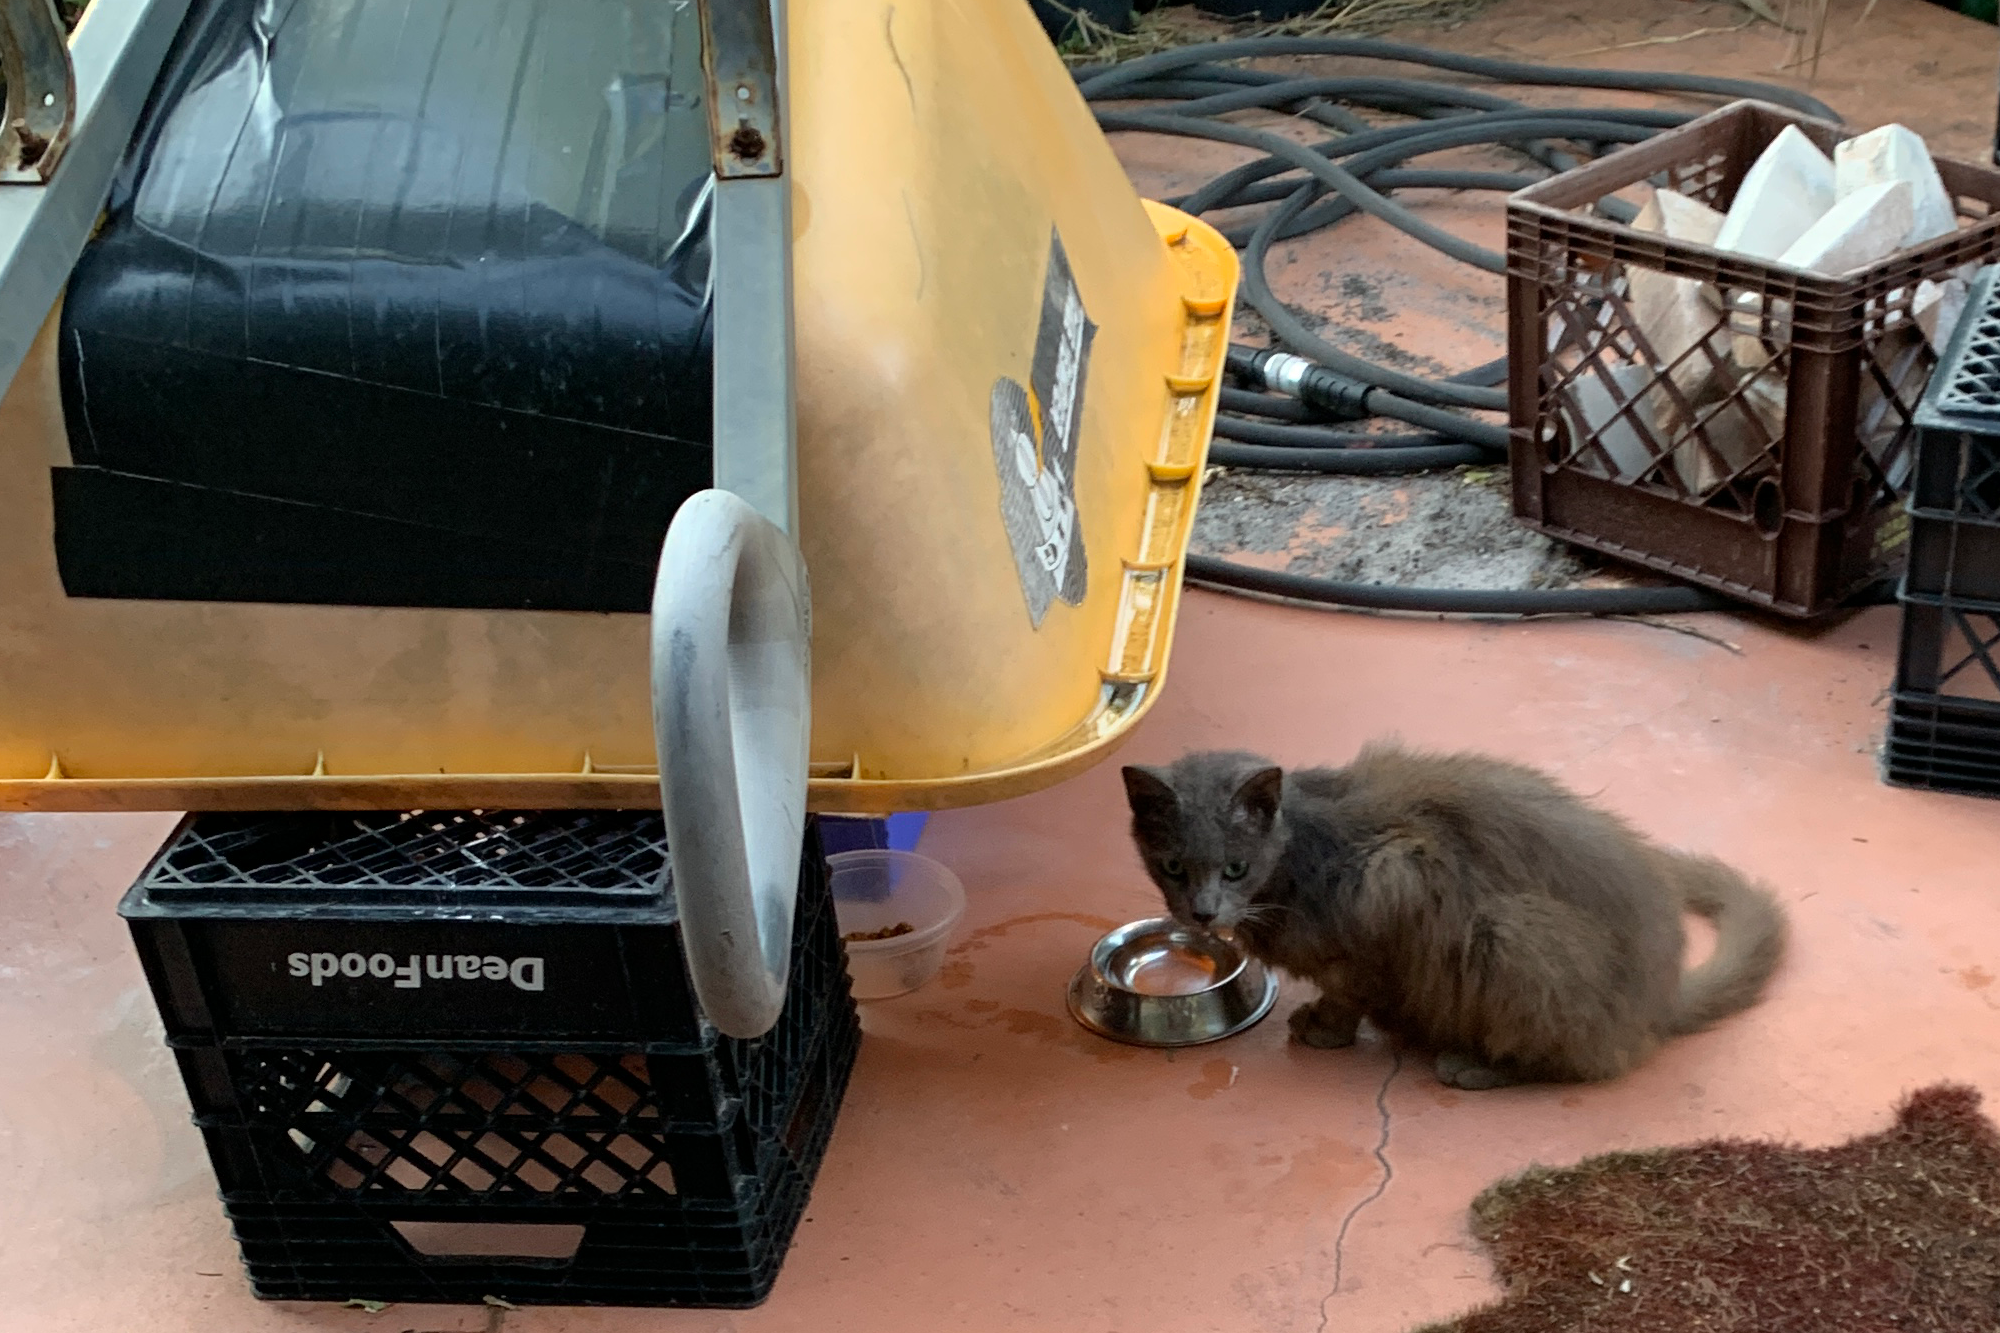 Stray cat crouching over water bowl under wheel barrow.